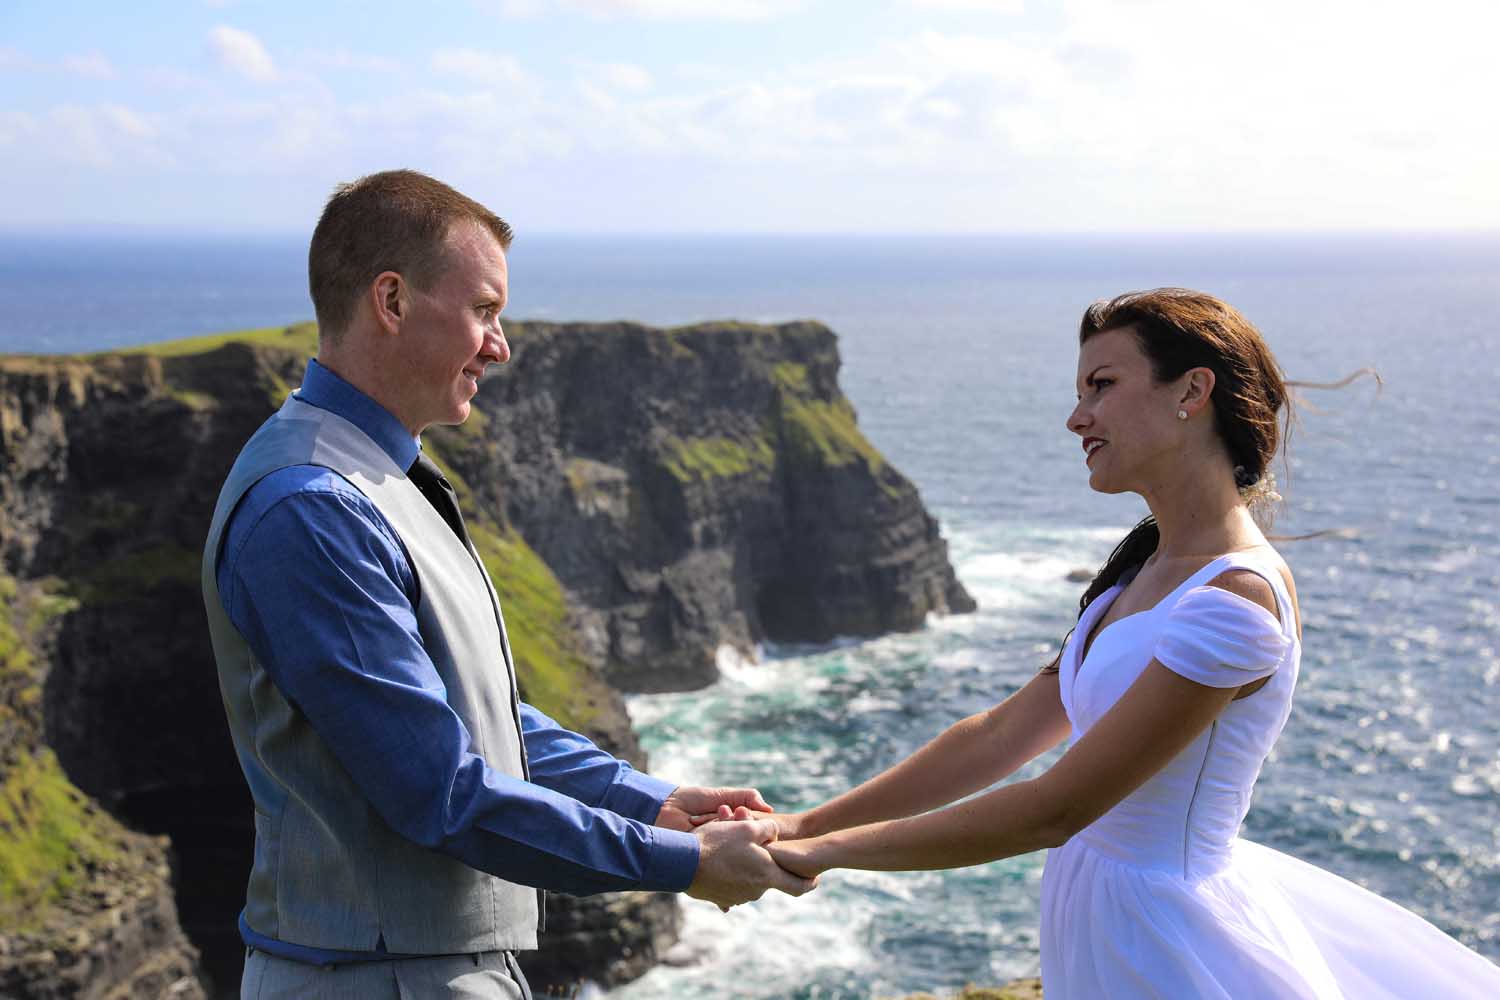 Holding hands during their wedding ceremony at The Cliffs of Moher